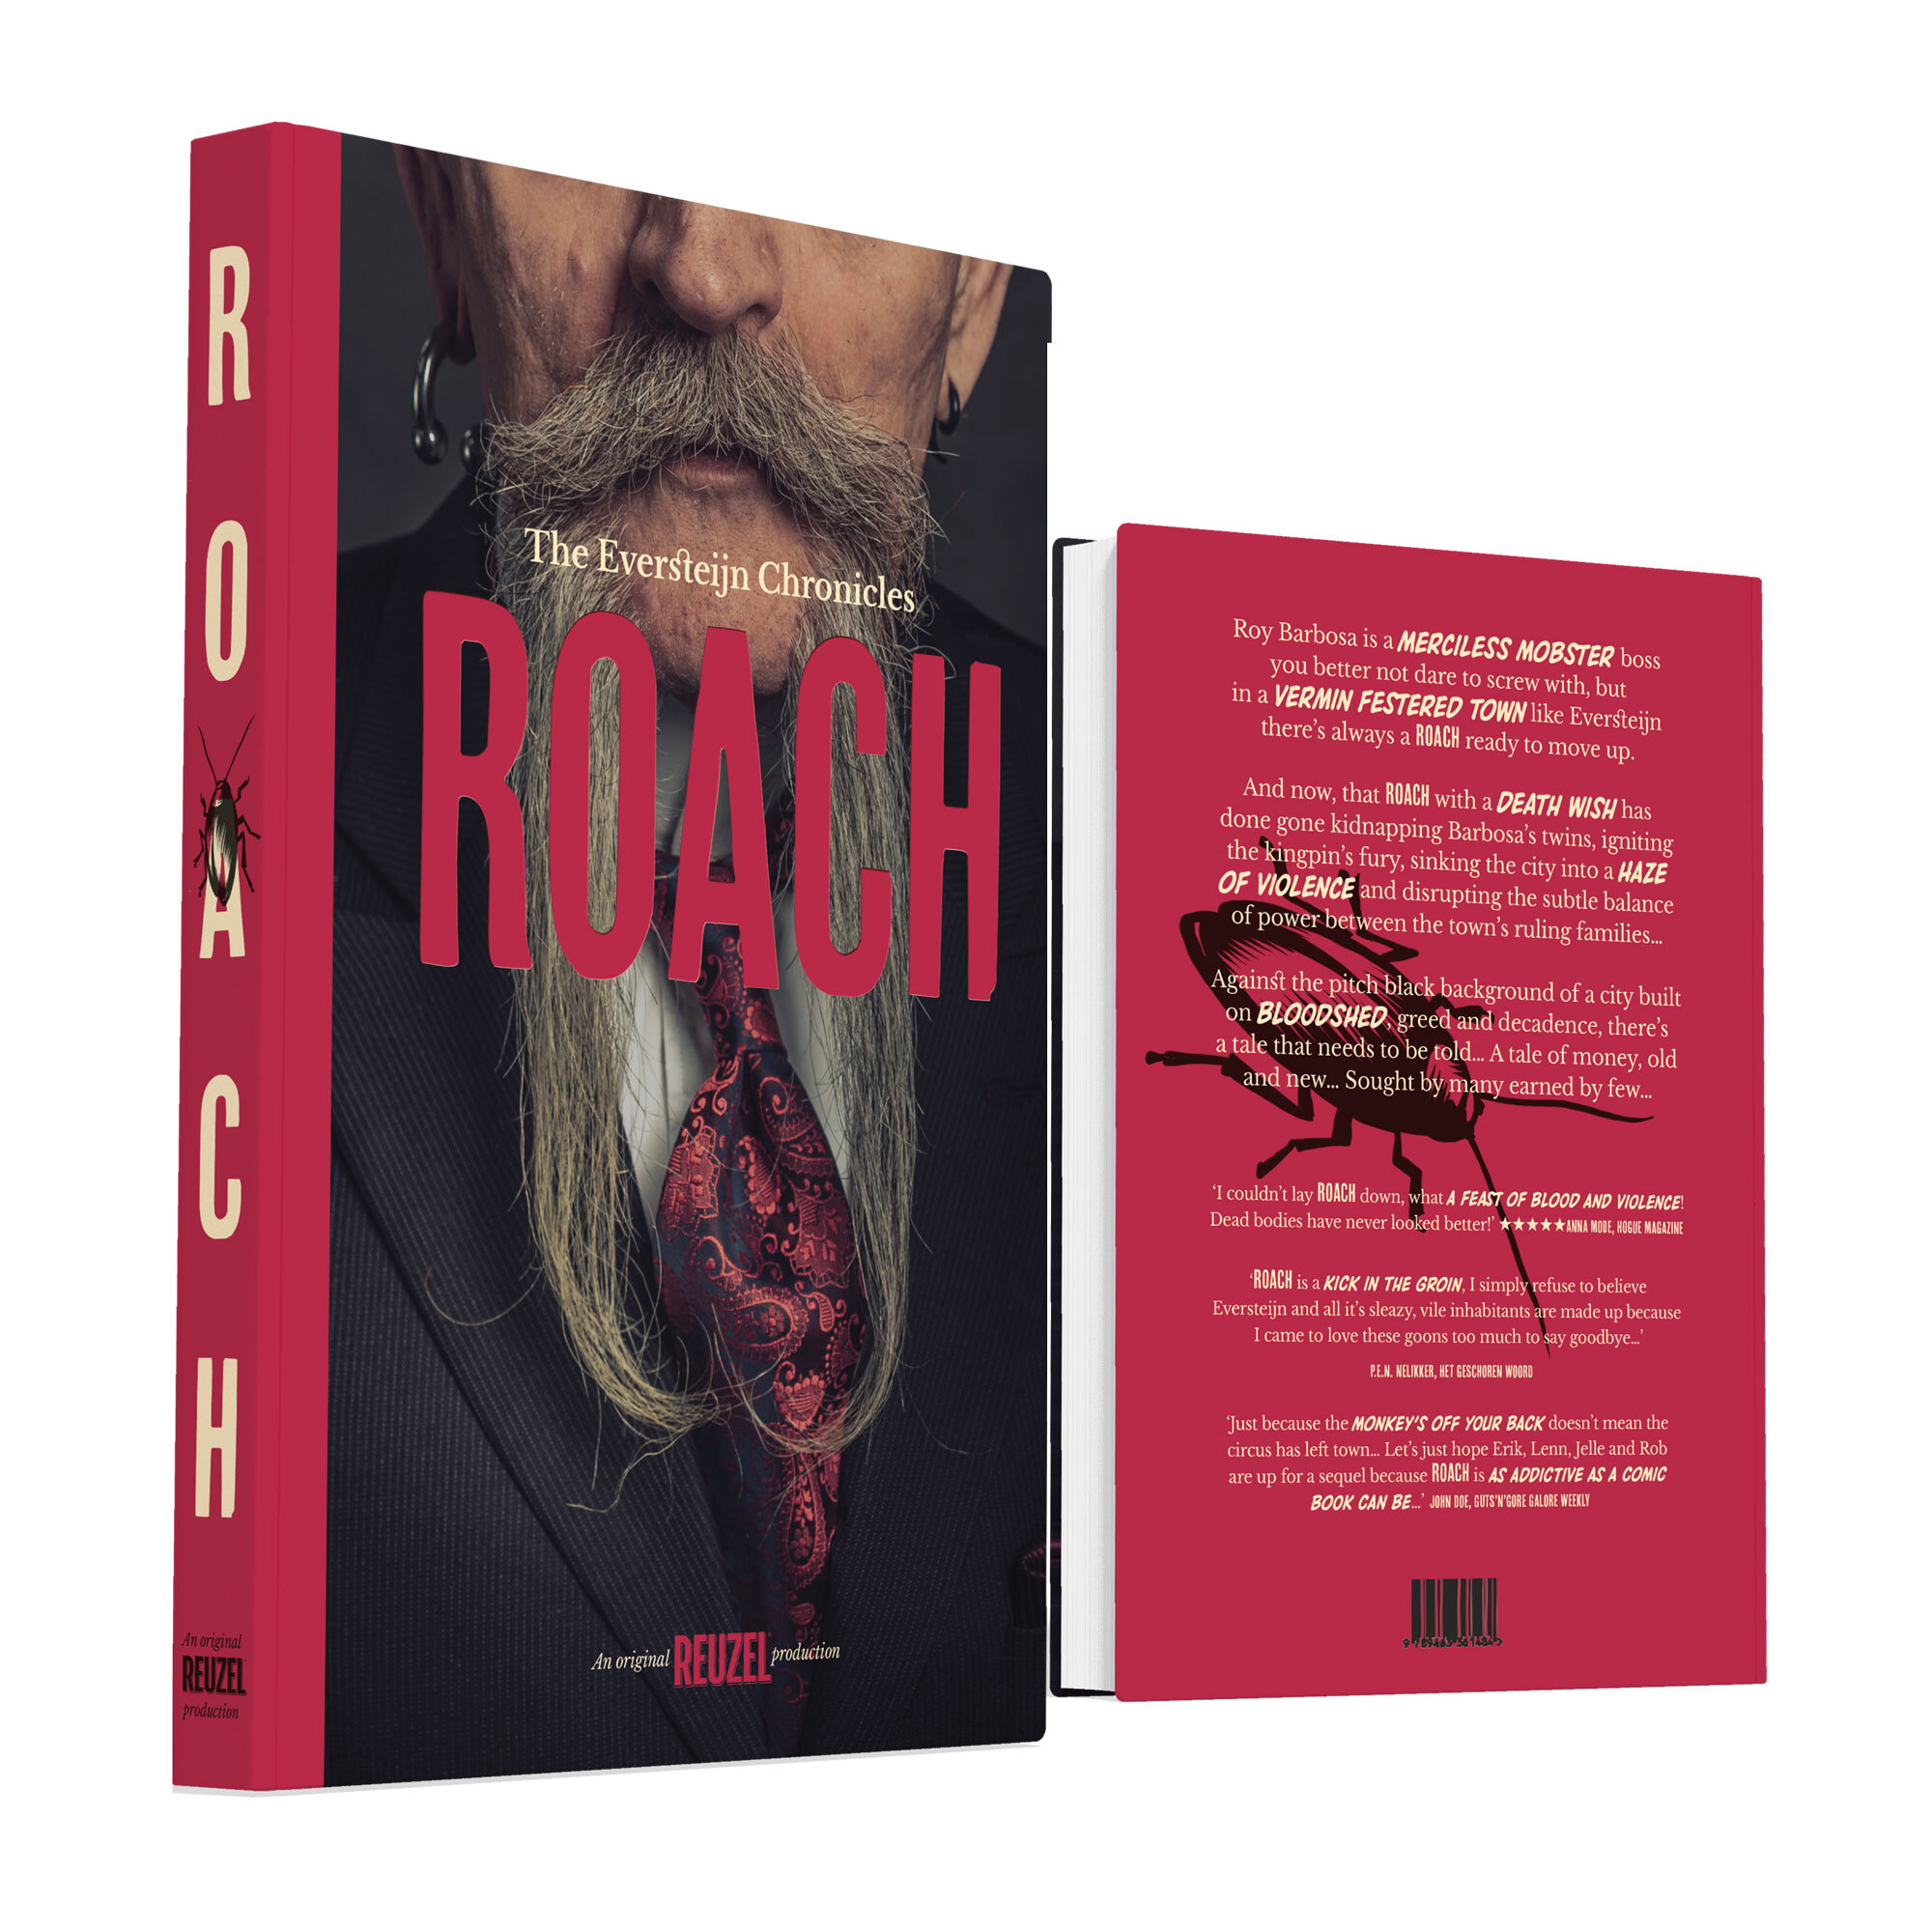 Reuzel The Eversteijn Chronicles - Roach Book - Limited Edition